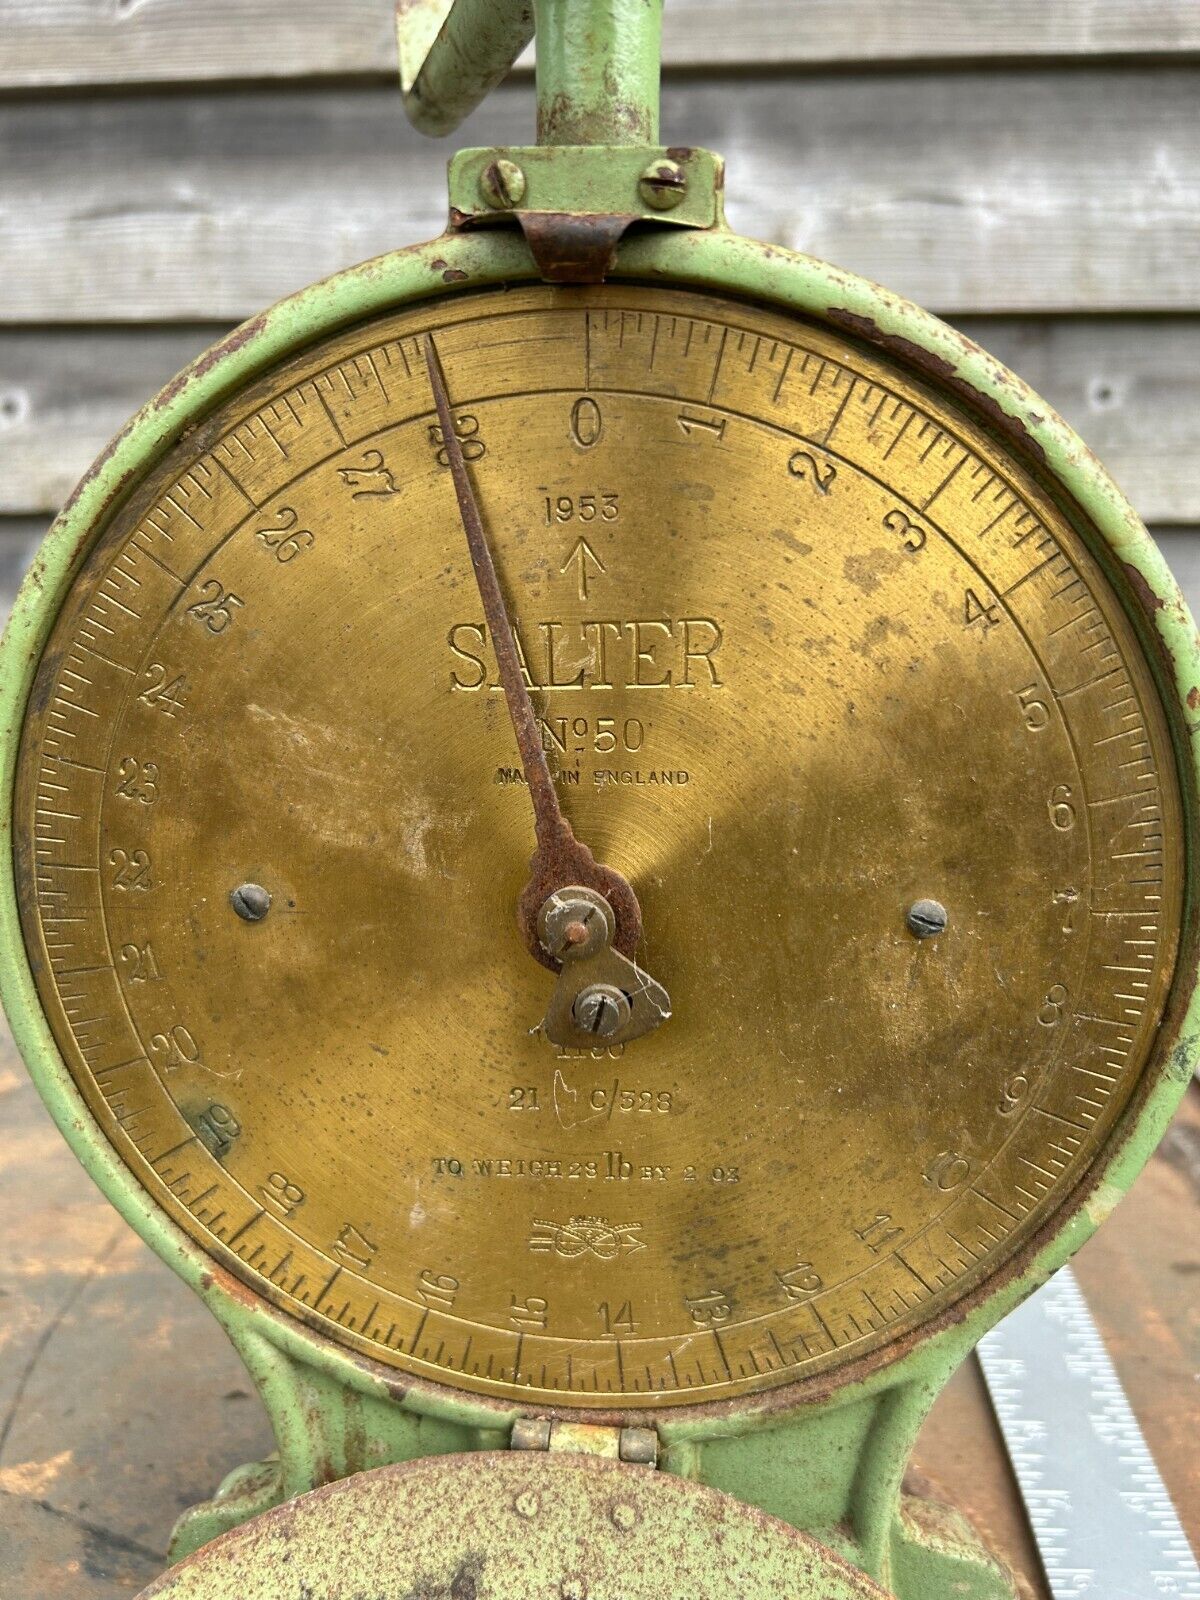 Antique/Vintage Salter No 50 weighing scales 1953 no pan ex-military brass dial